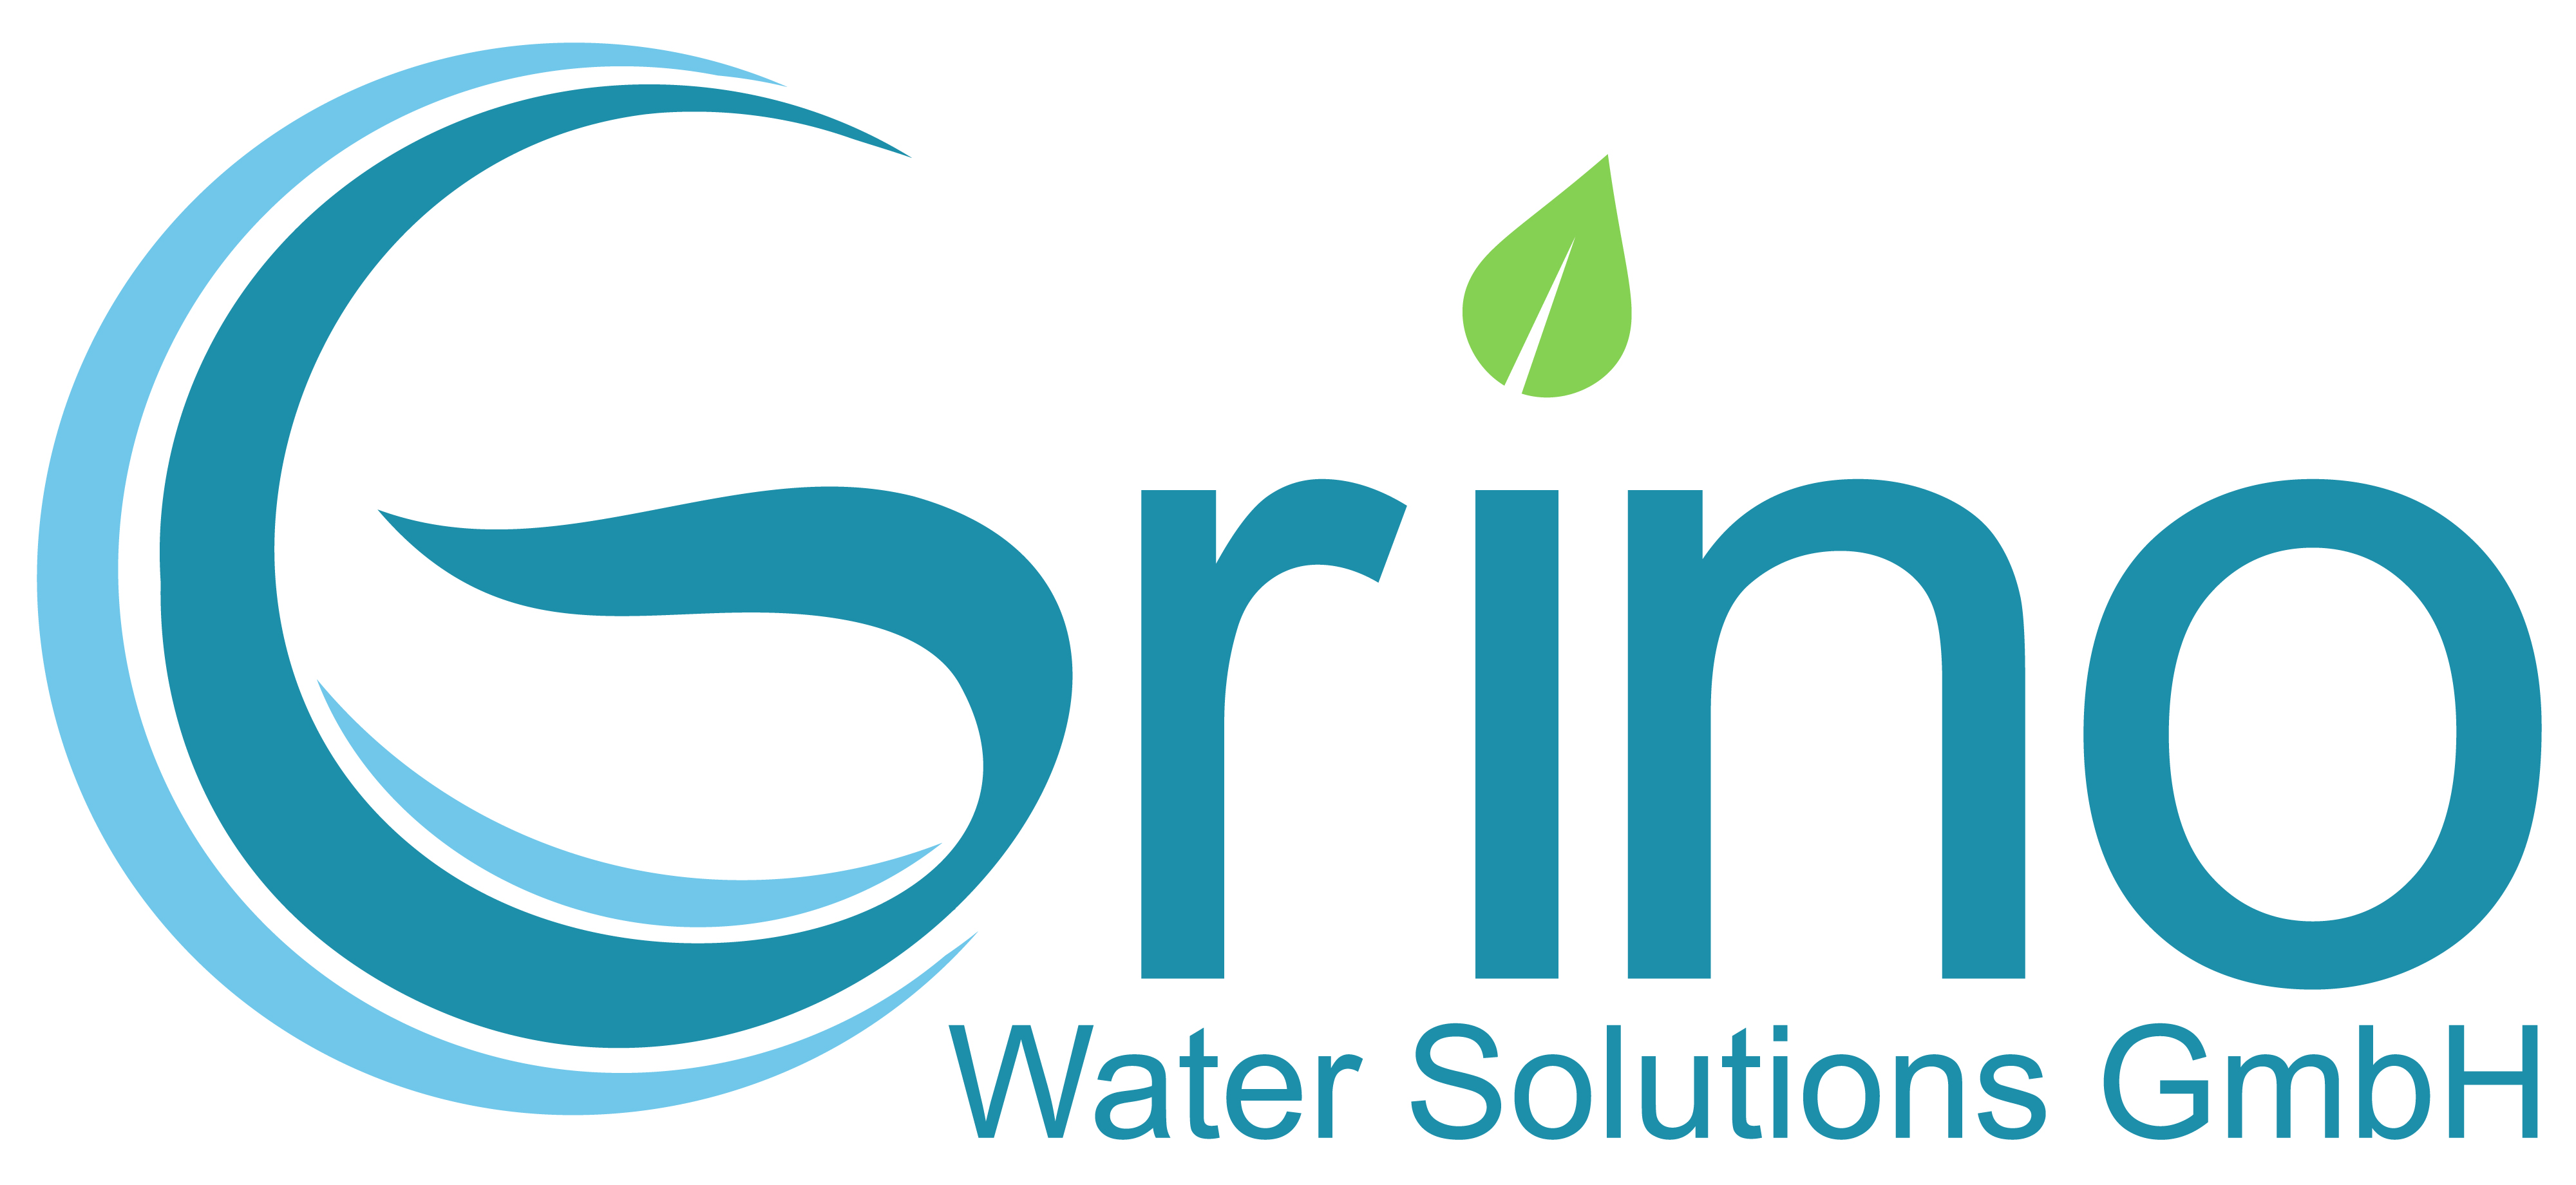 Grino Water Solutions GmbH